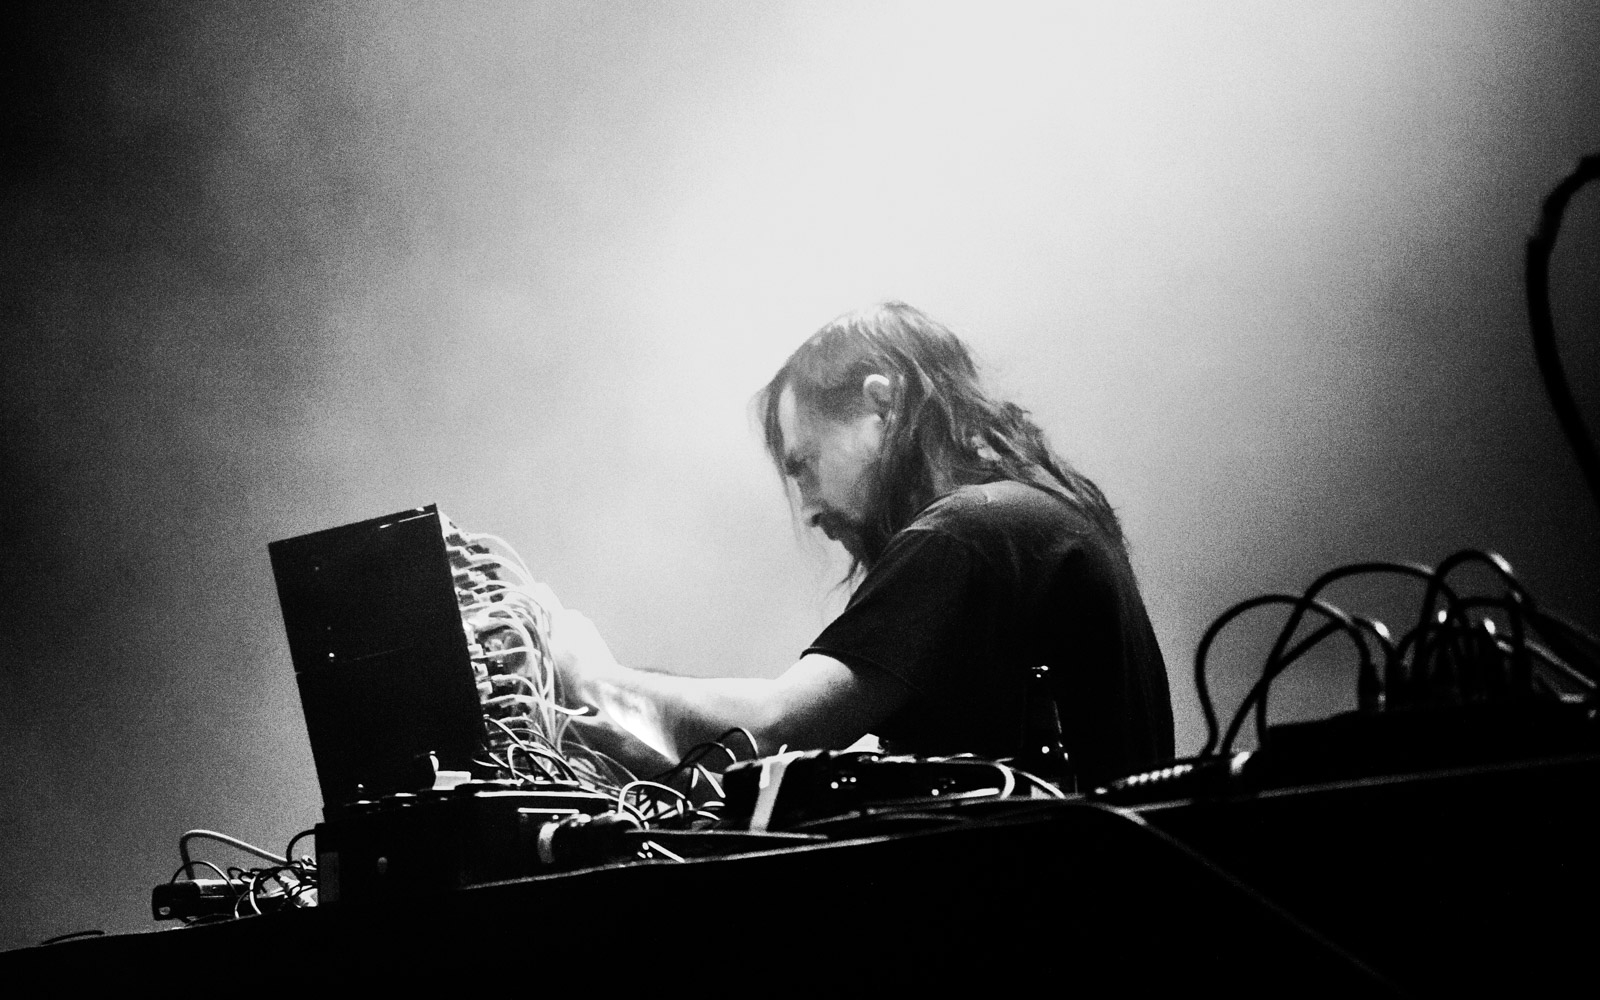 Russell Haswell